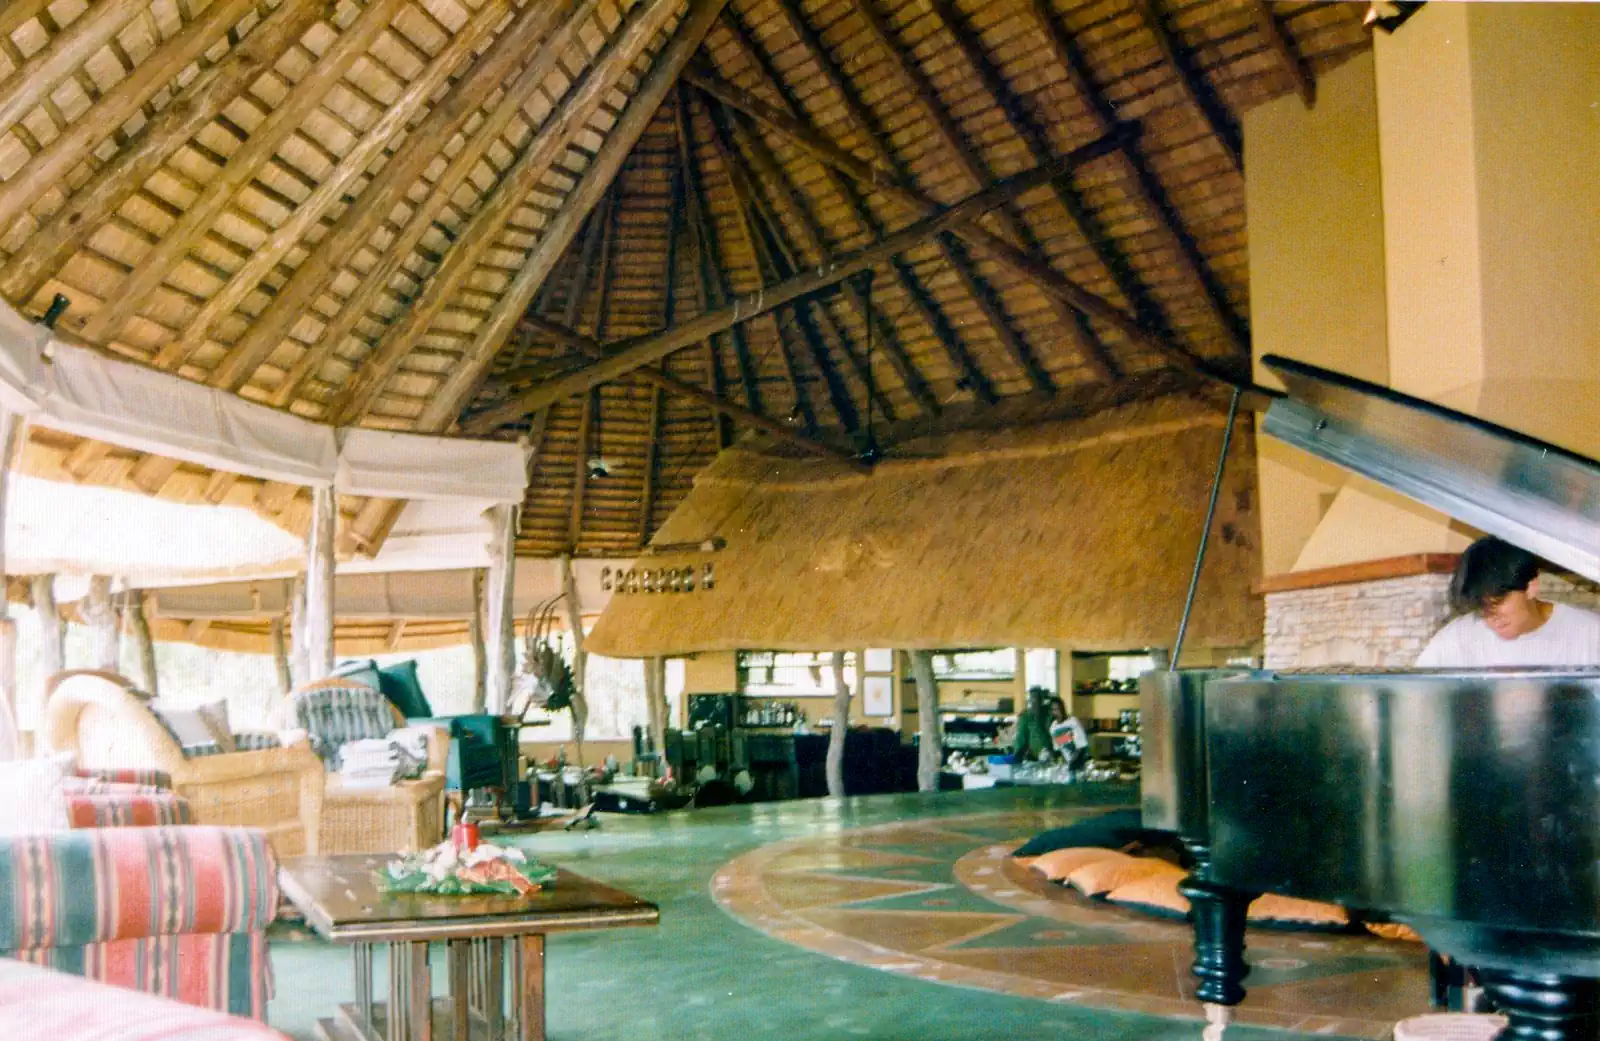 Traditional wooden gumpole structure and thatched roof in earthy interiors lodge